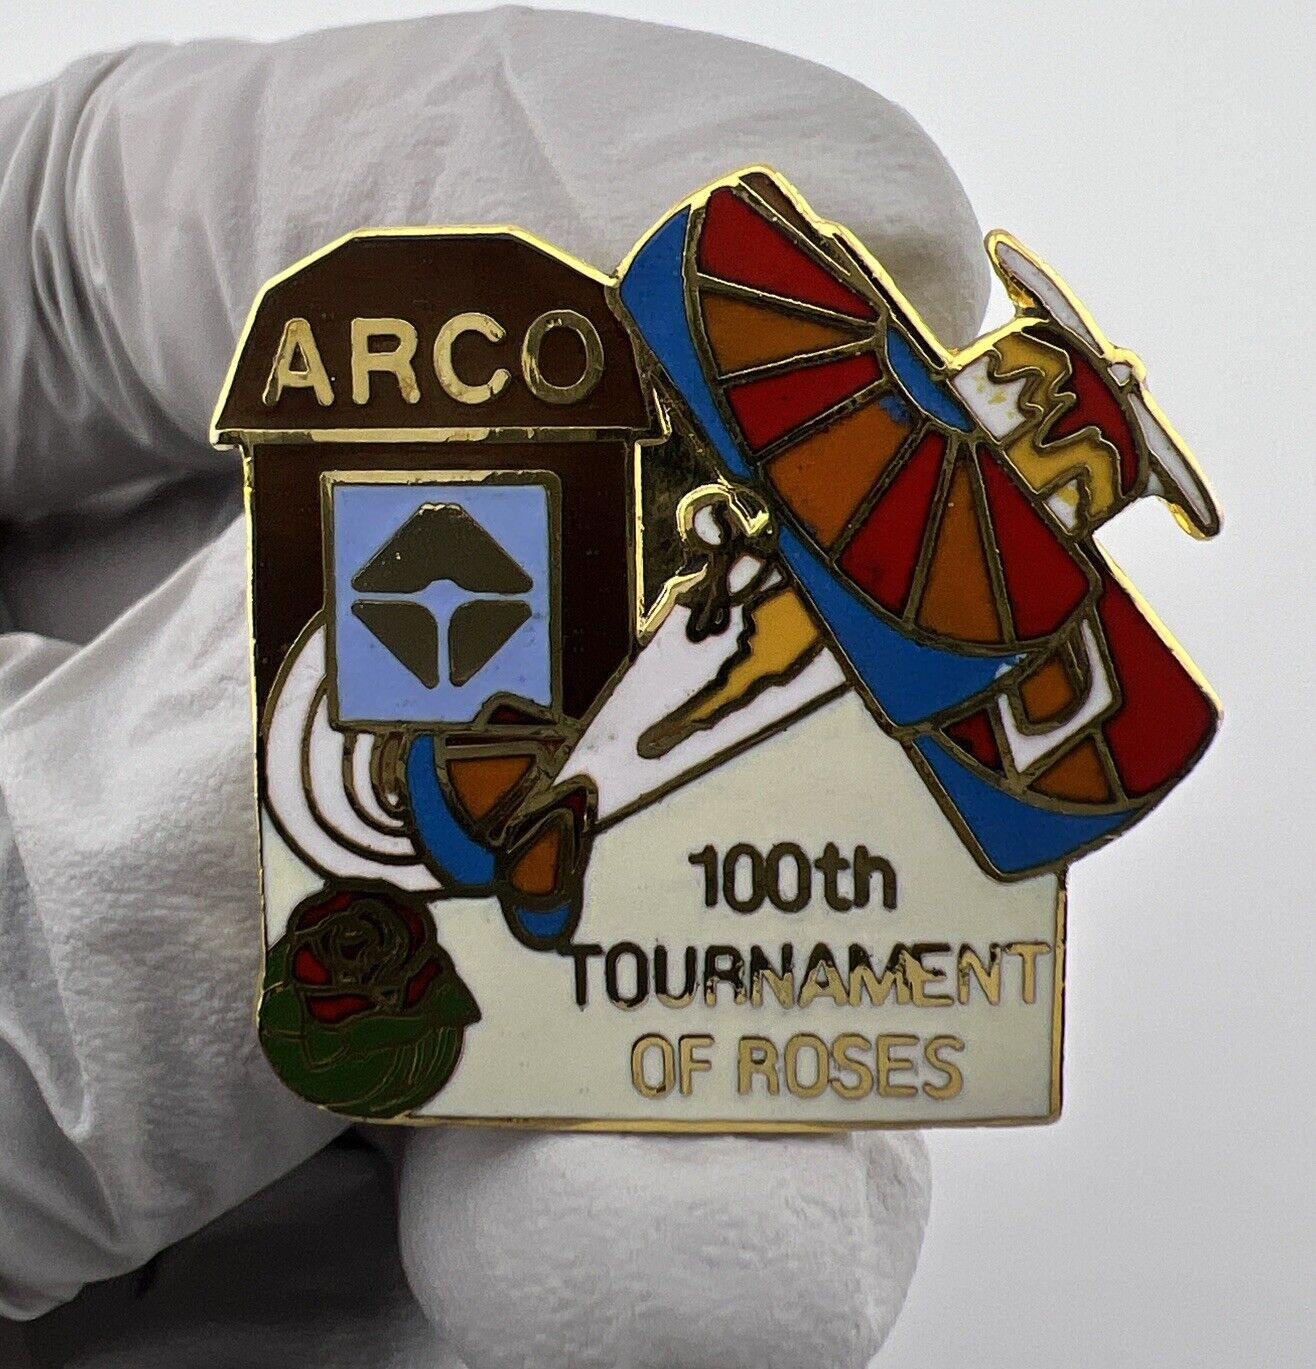 Rose Parade 1989 ARCO 100th Tournament of Roses Lapel Pin